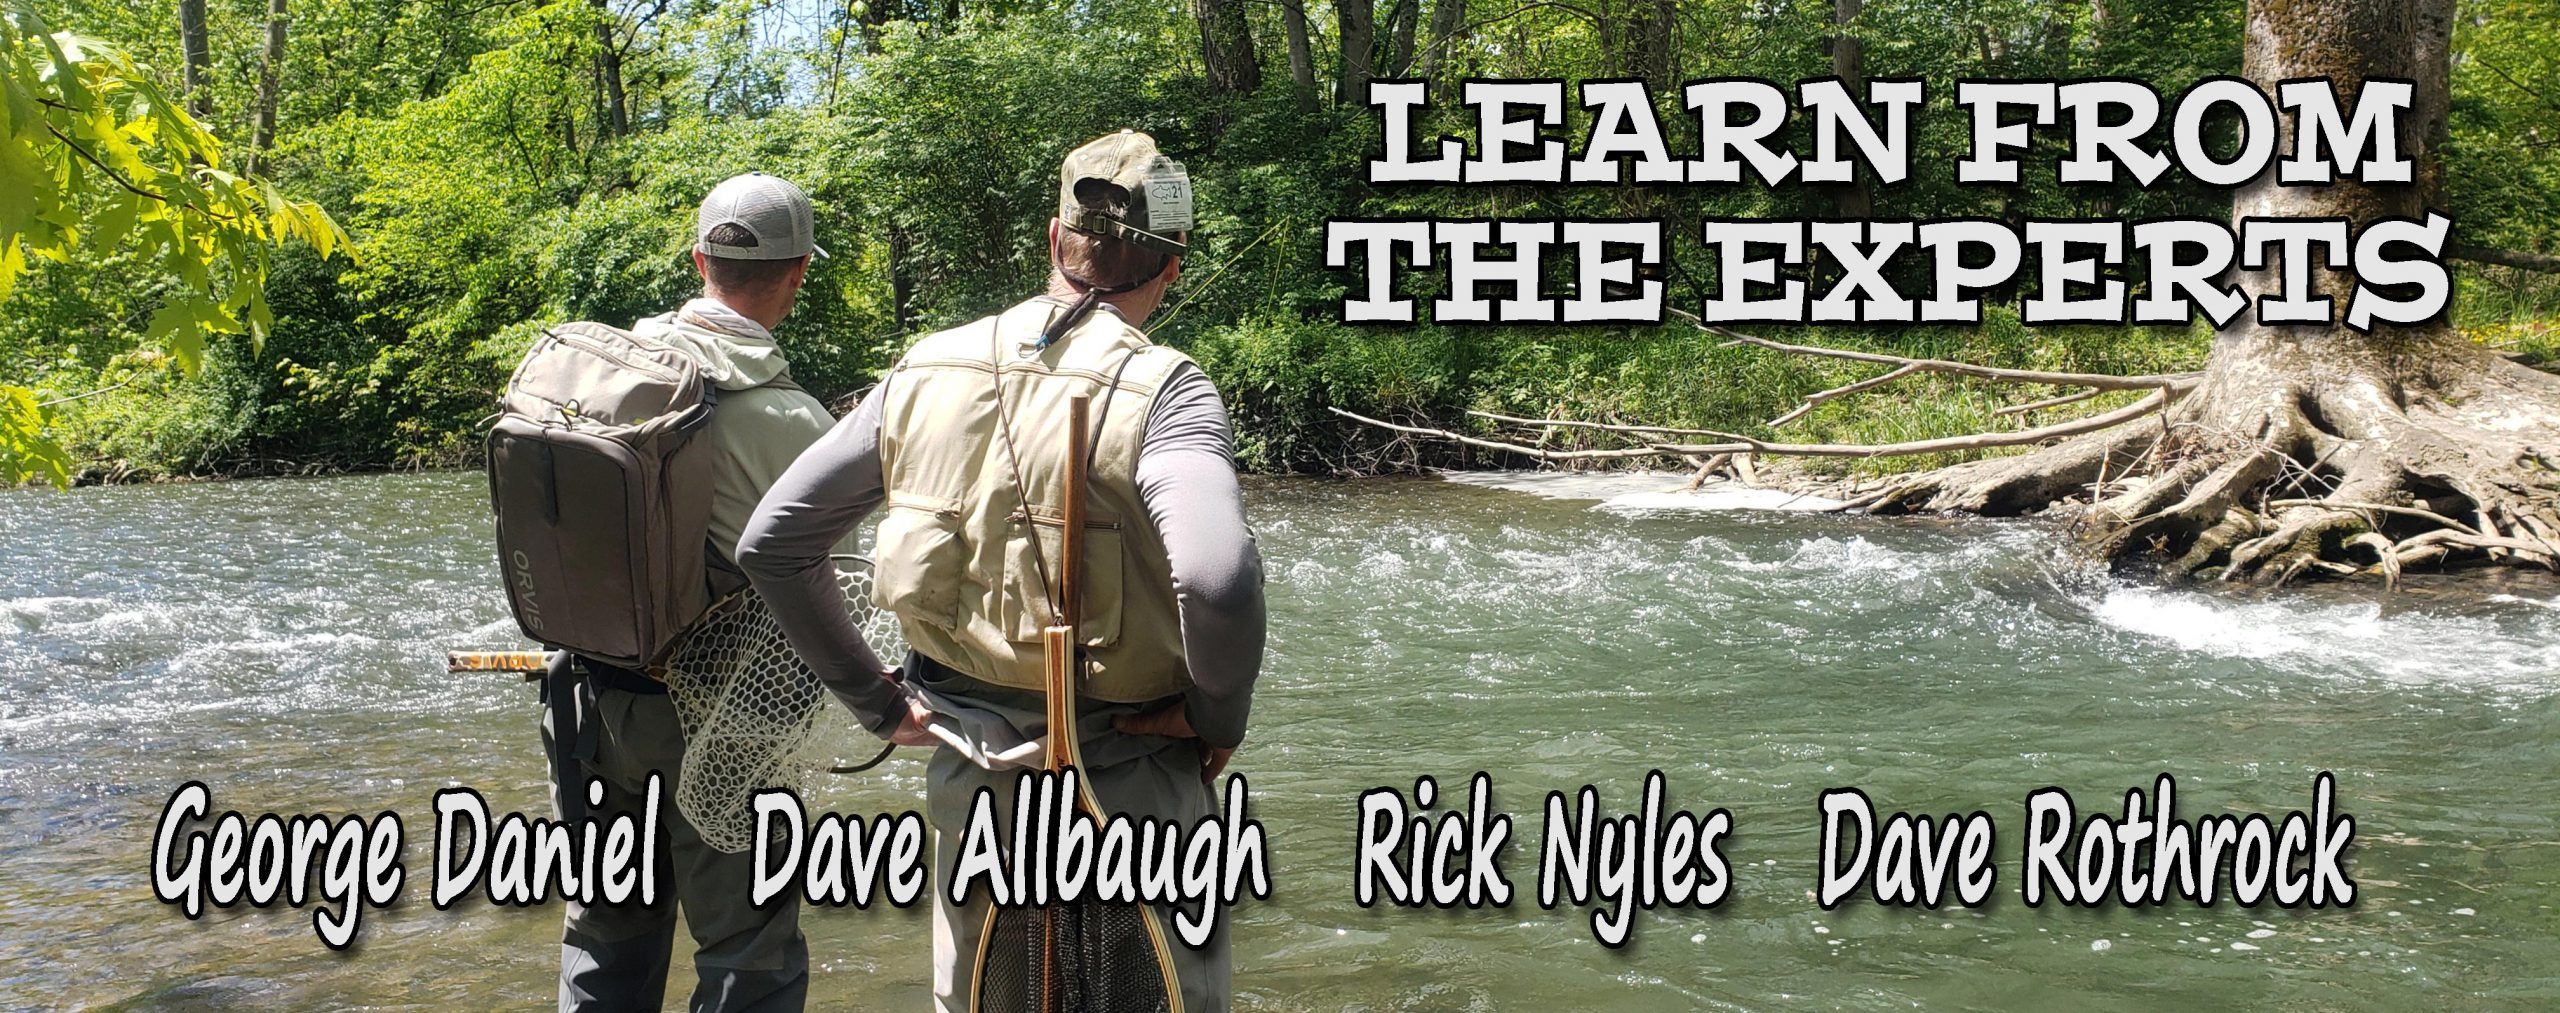 Join George Danial, Dave Allbaugh, Rick Nyles And Dave Rothrock. This Trip Will Concentrate On All Aspects Of Fly Fishing. Nymphing With George, Wetflies With Dave, Dry Fly With Rick, and Casting With Dave Rothrock. Come Learn From Our Experience.